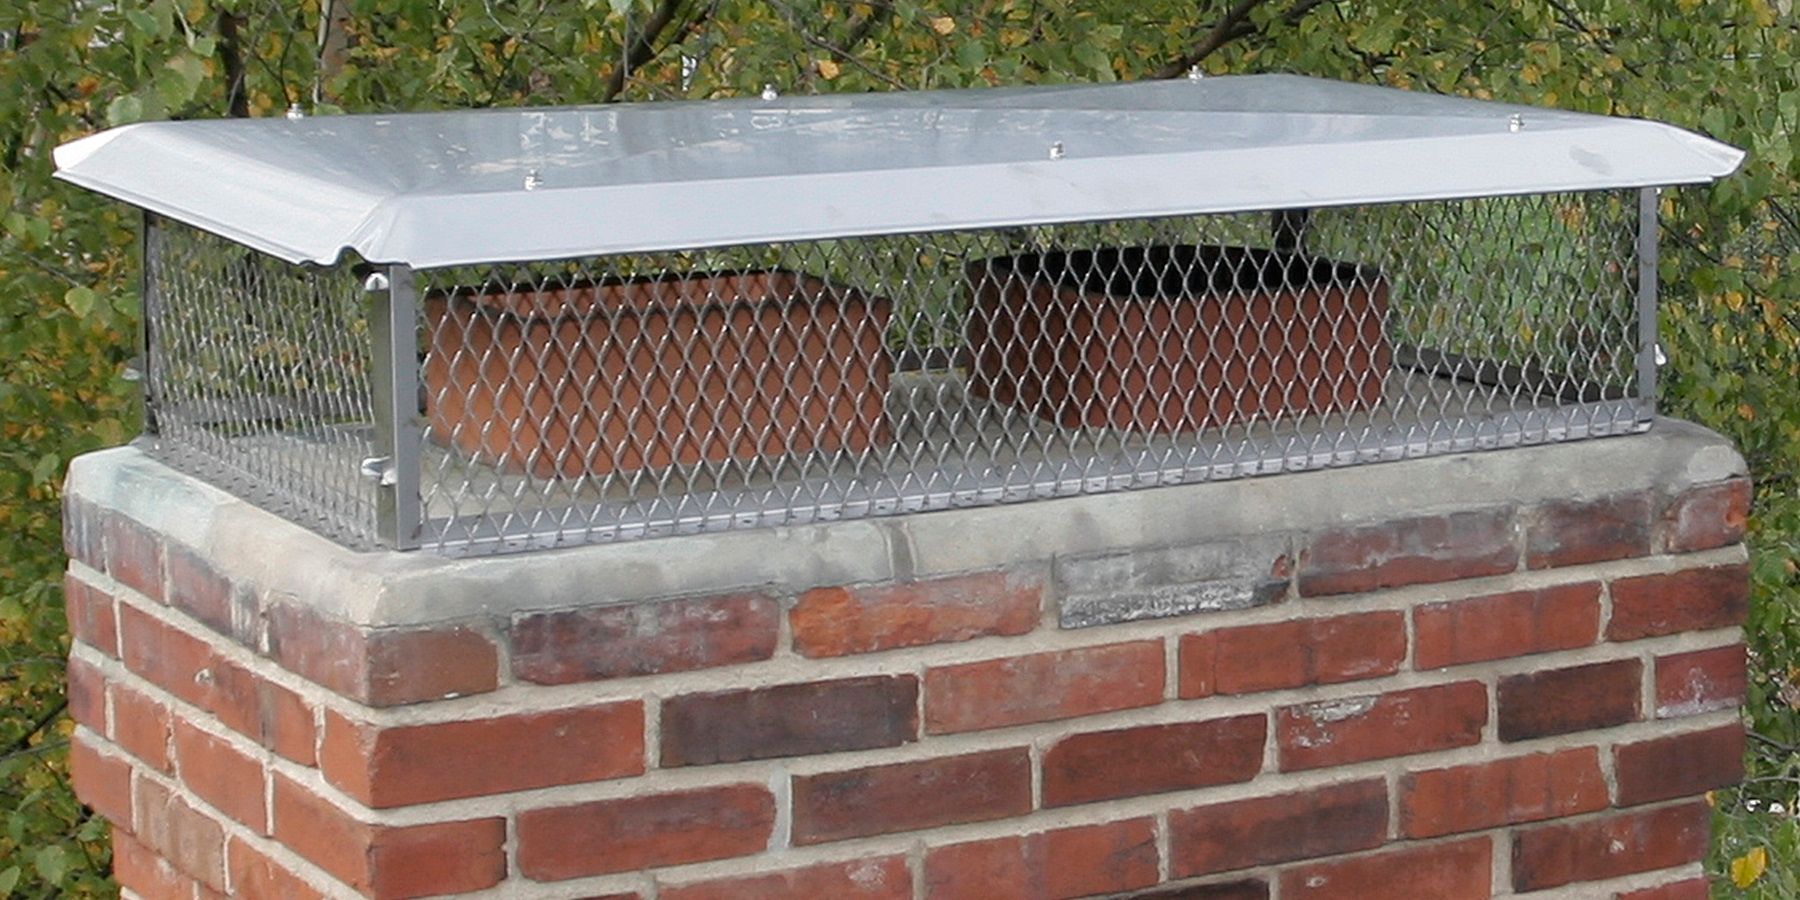 A stainless steel multi-flue chimney cap installed on a chimney with two flue pipes.